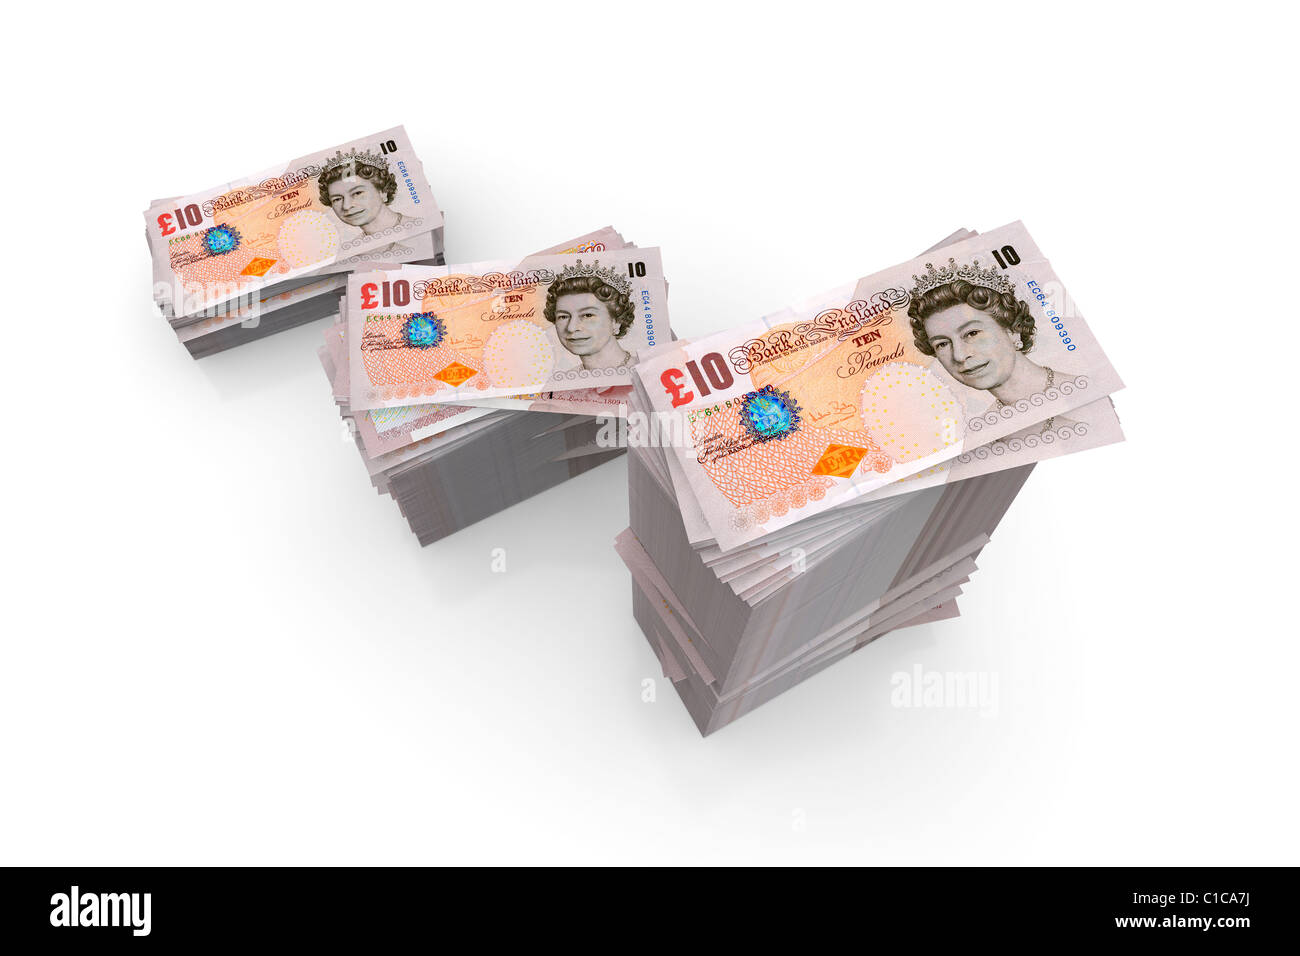 Money - Piles of Ten Pound Notes Sterling Stock Photo